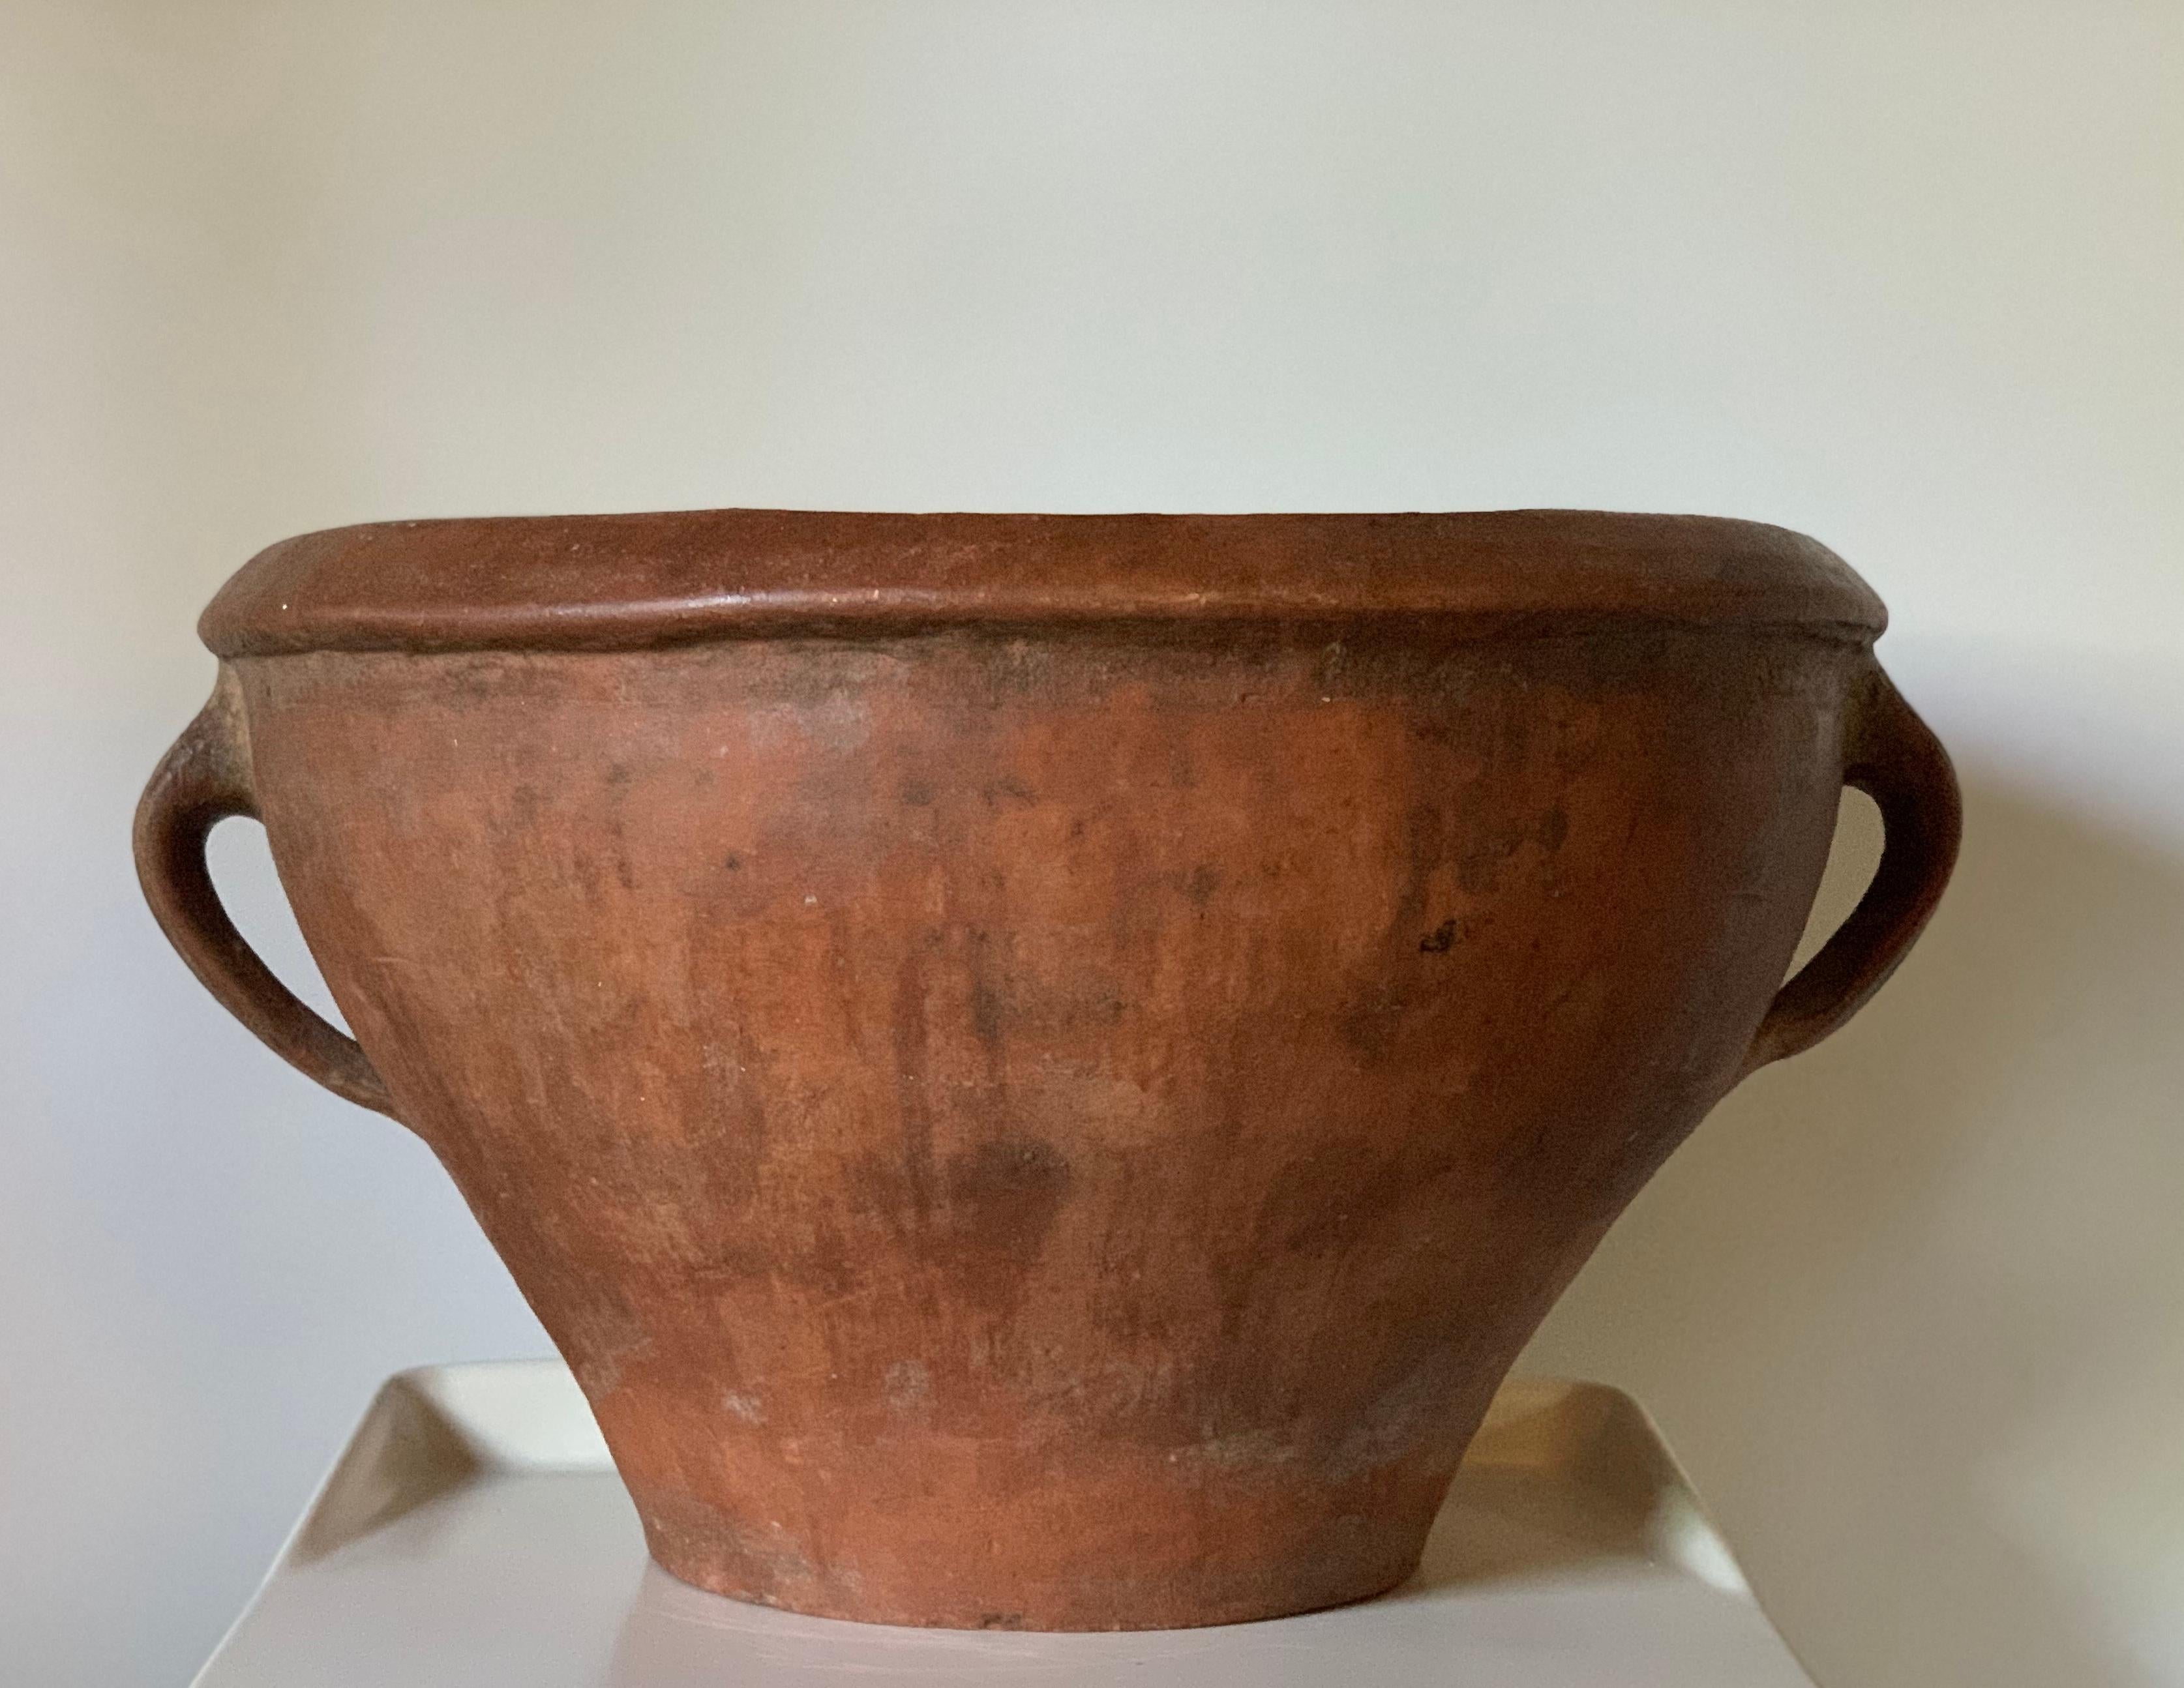 19th century Spanish ceramic olla - pot. Earth tone glaze, two handles and applied molding. In very good shape for its age. Originally used for water and cooking. Can be used for planting. Lovely original patina.